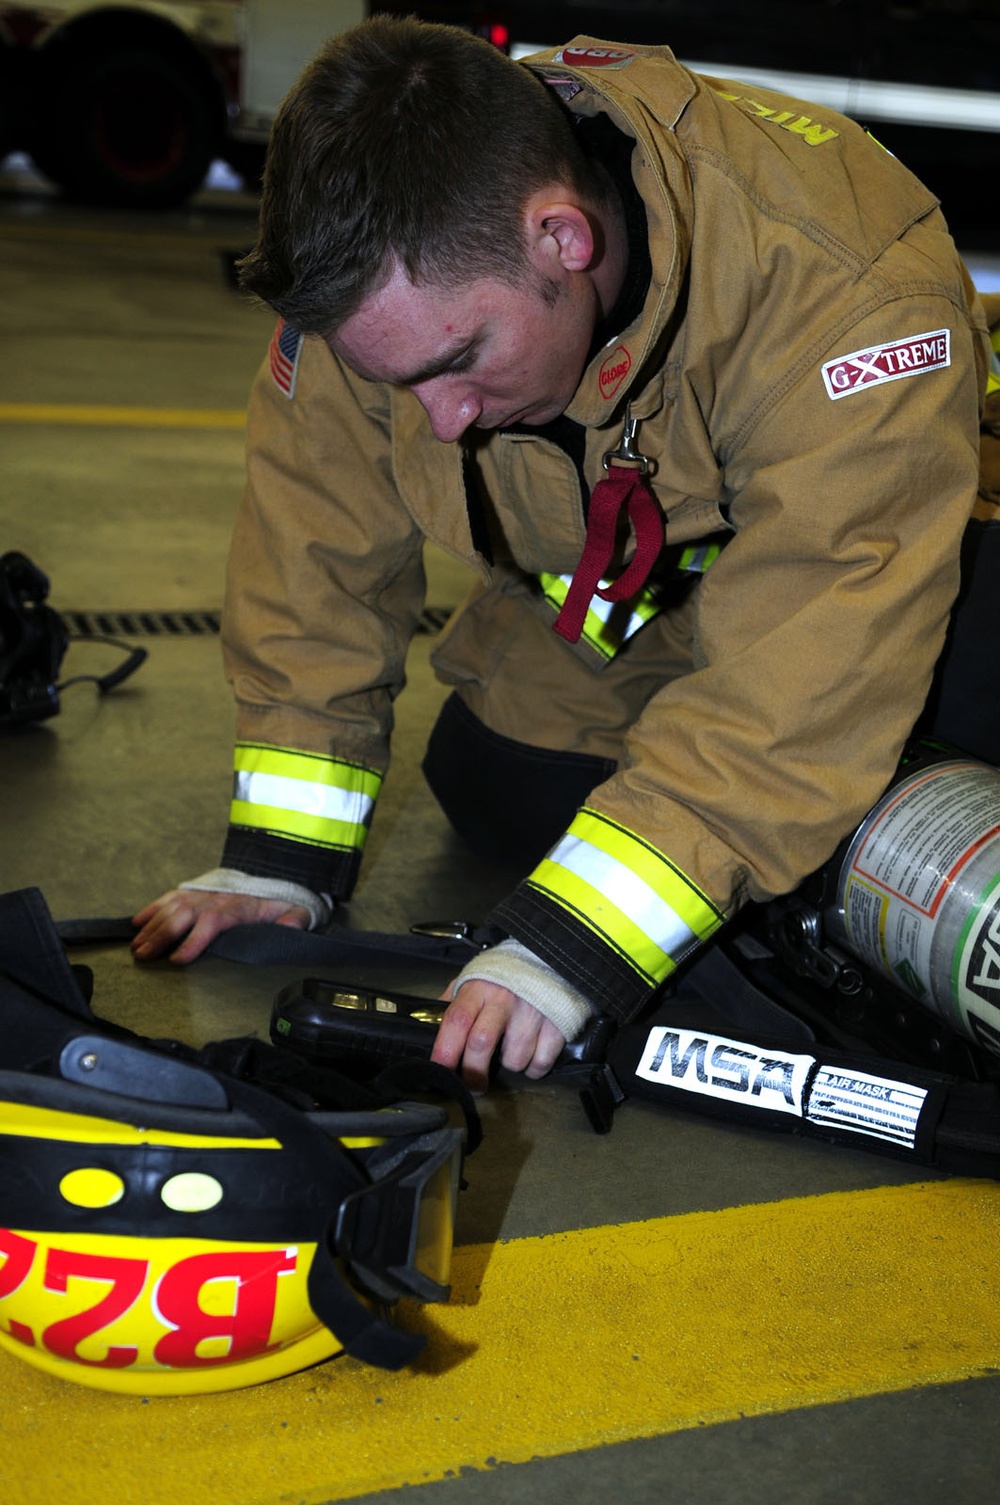 Breathe easy: Firefighters train on SCBA to ensure own, others lives kept safe